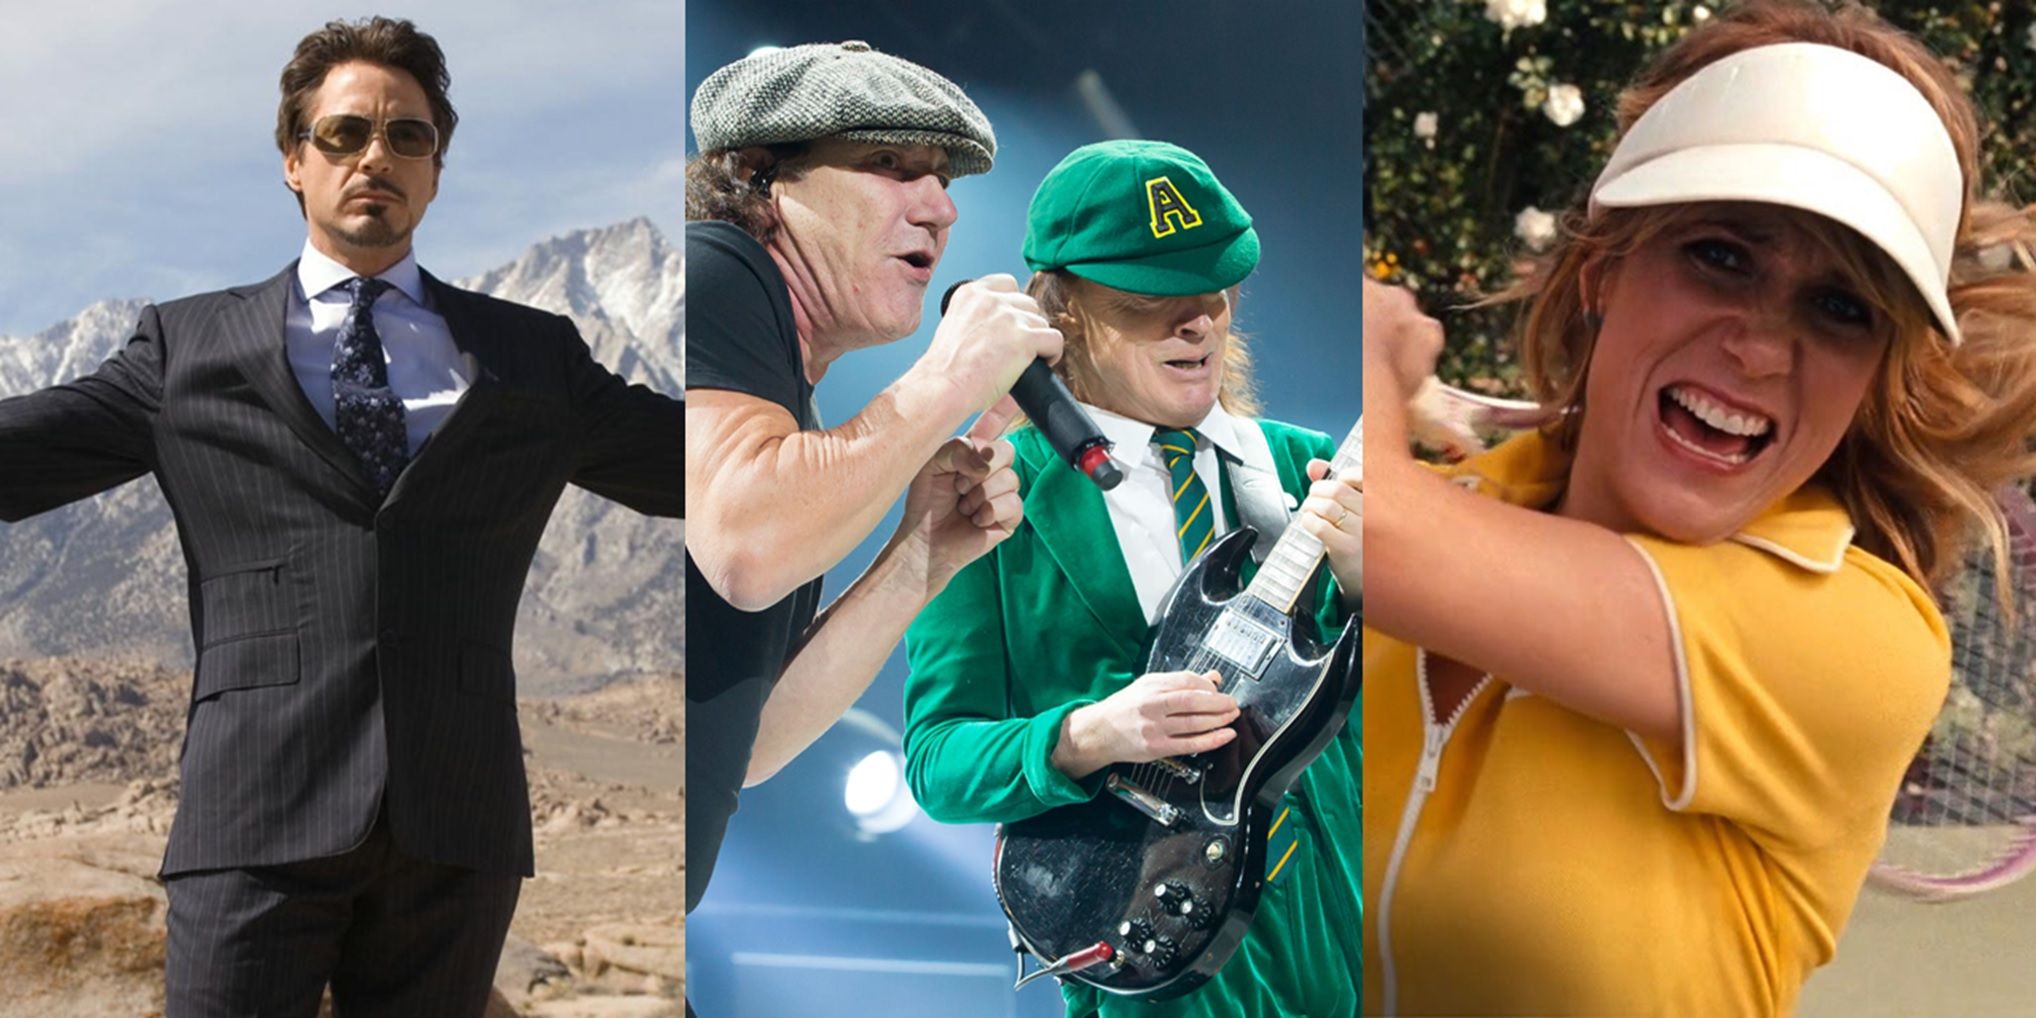 Top 10 AC/DC Songs Of All Time